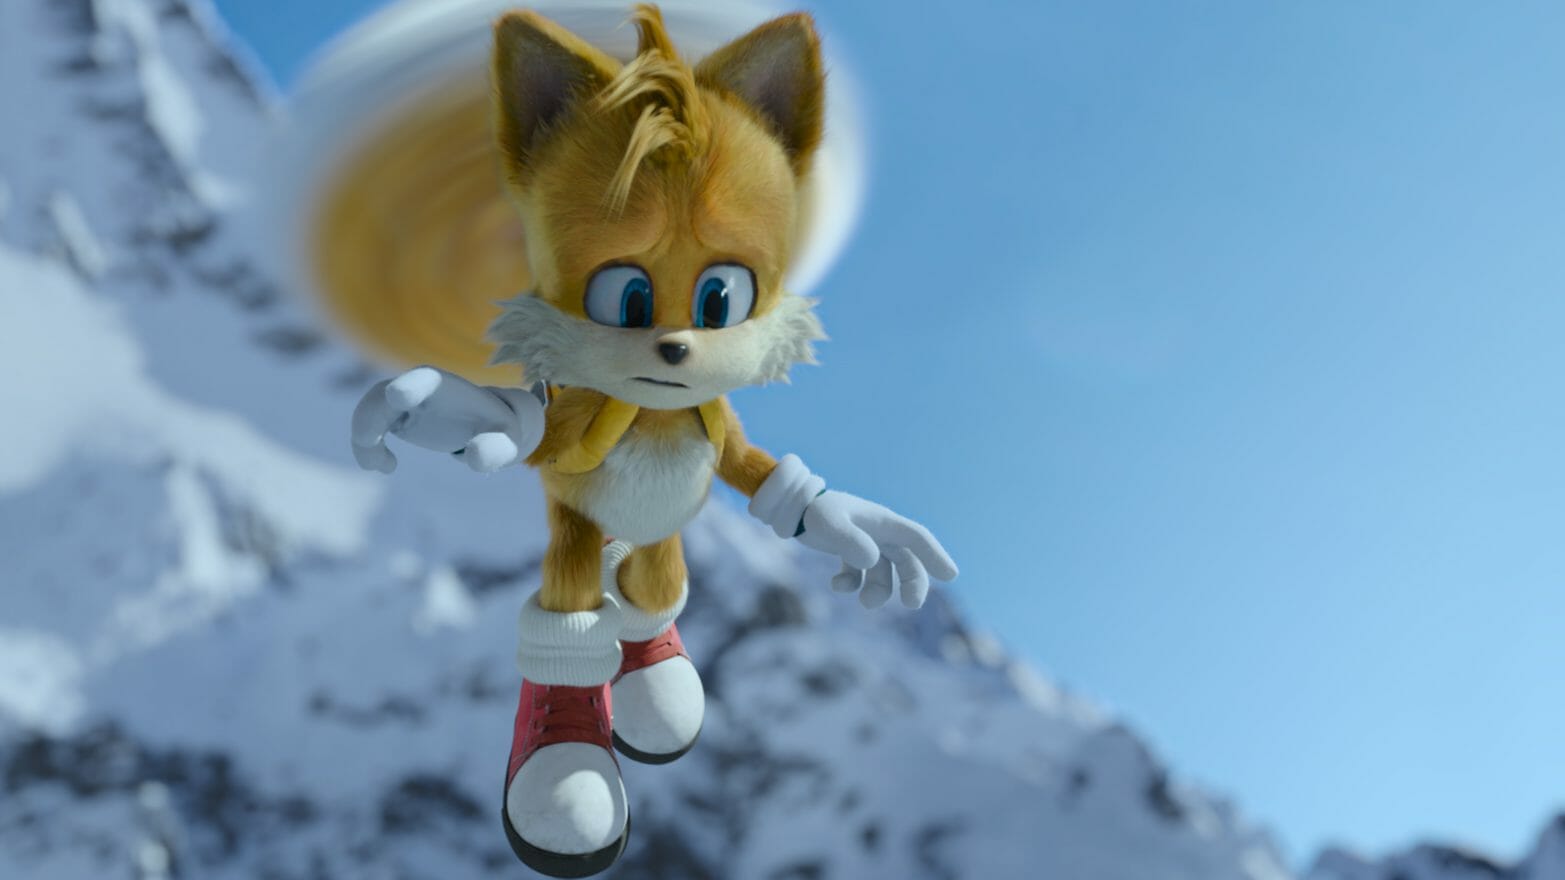 Tails flies sporting his yellow backpack in front of a snowy mountain in SONIC THE HEDGEHOG 2 directed by Jeff Fowler. 